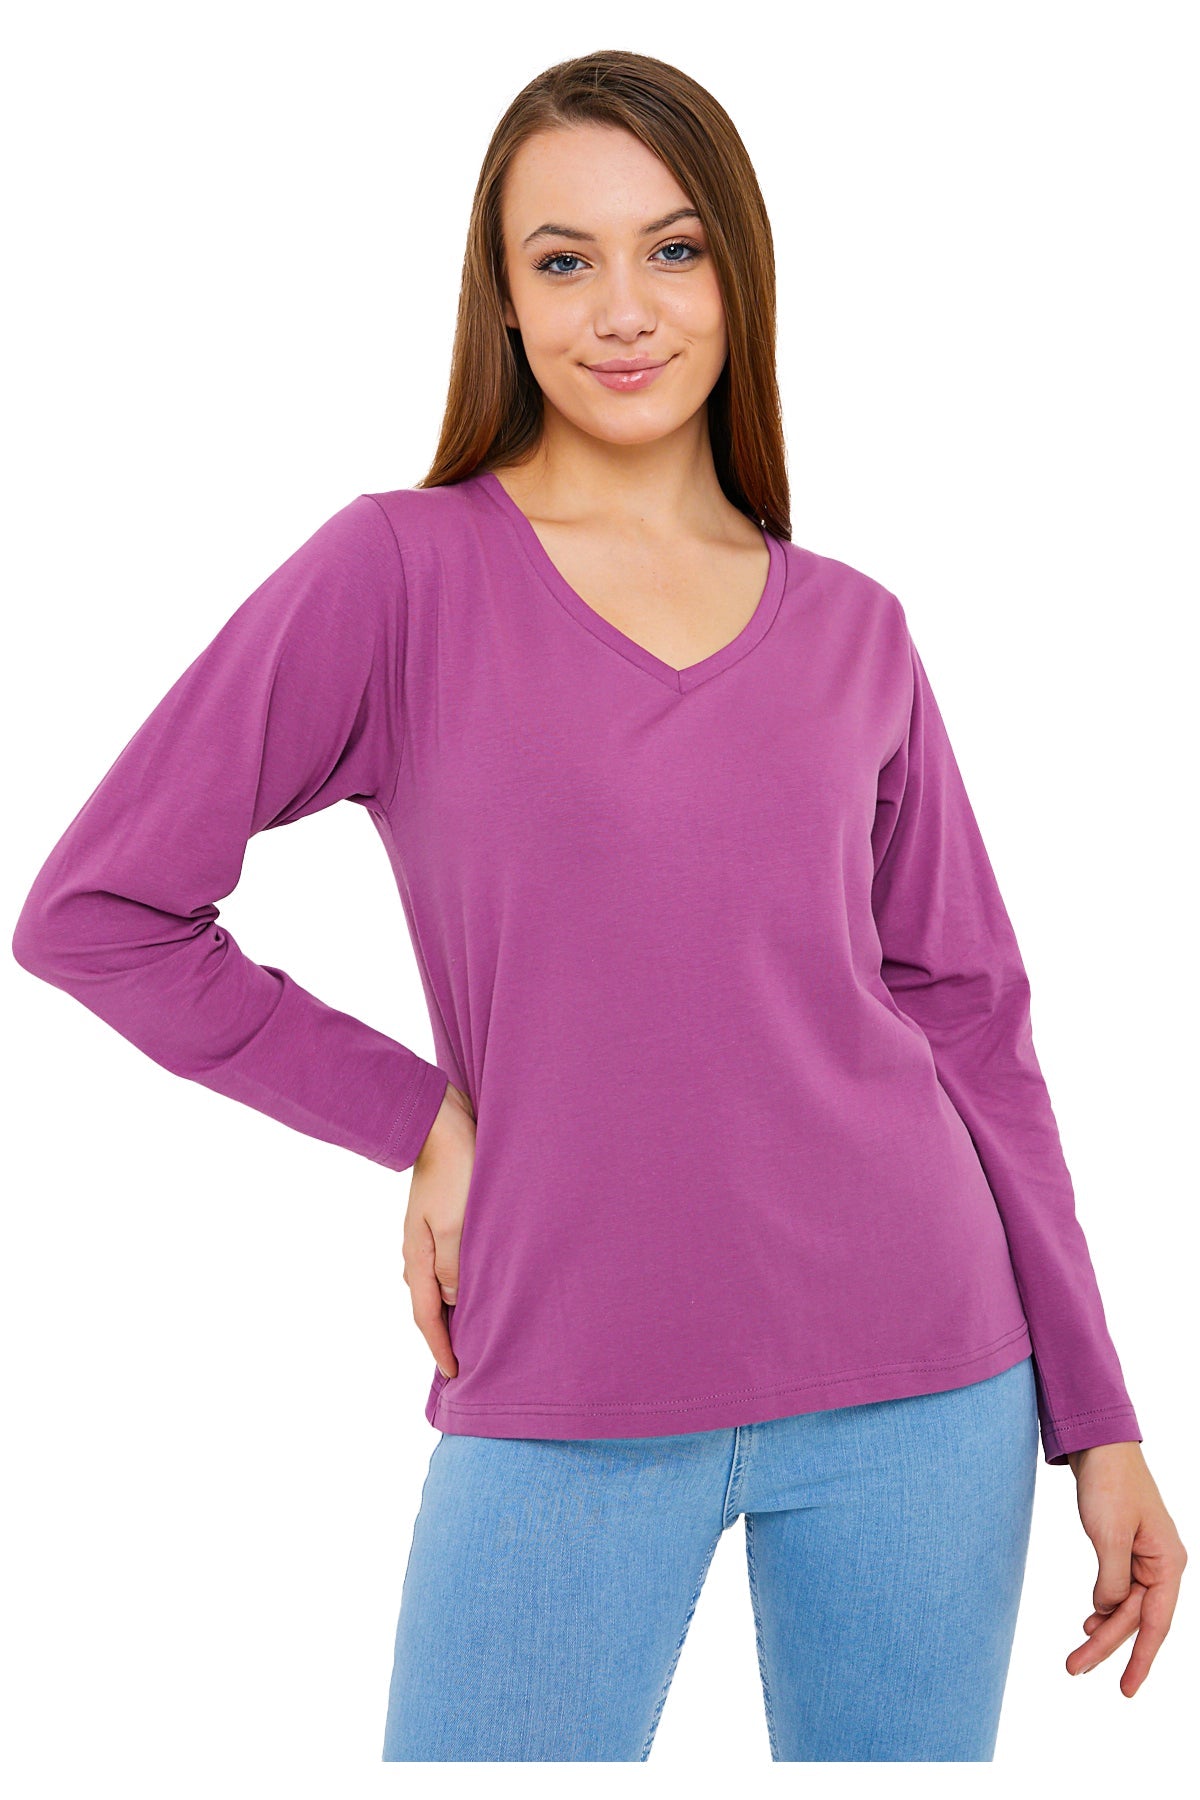 Long Sleeve V Neck T-Shirts for Women & Girls - Colorful Pima Cotton-154